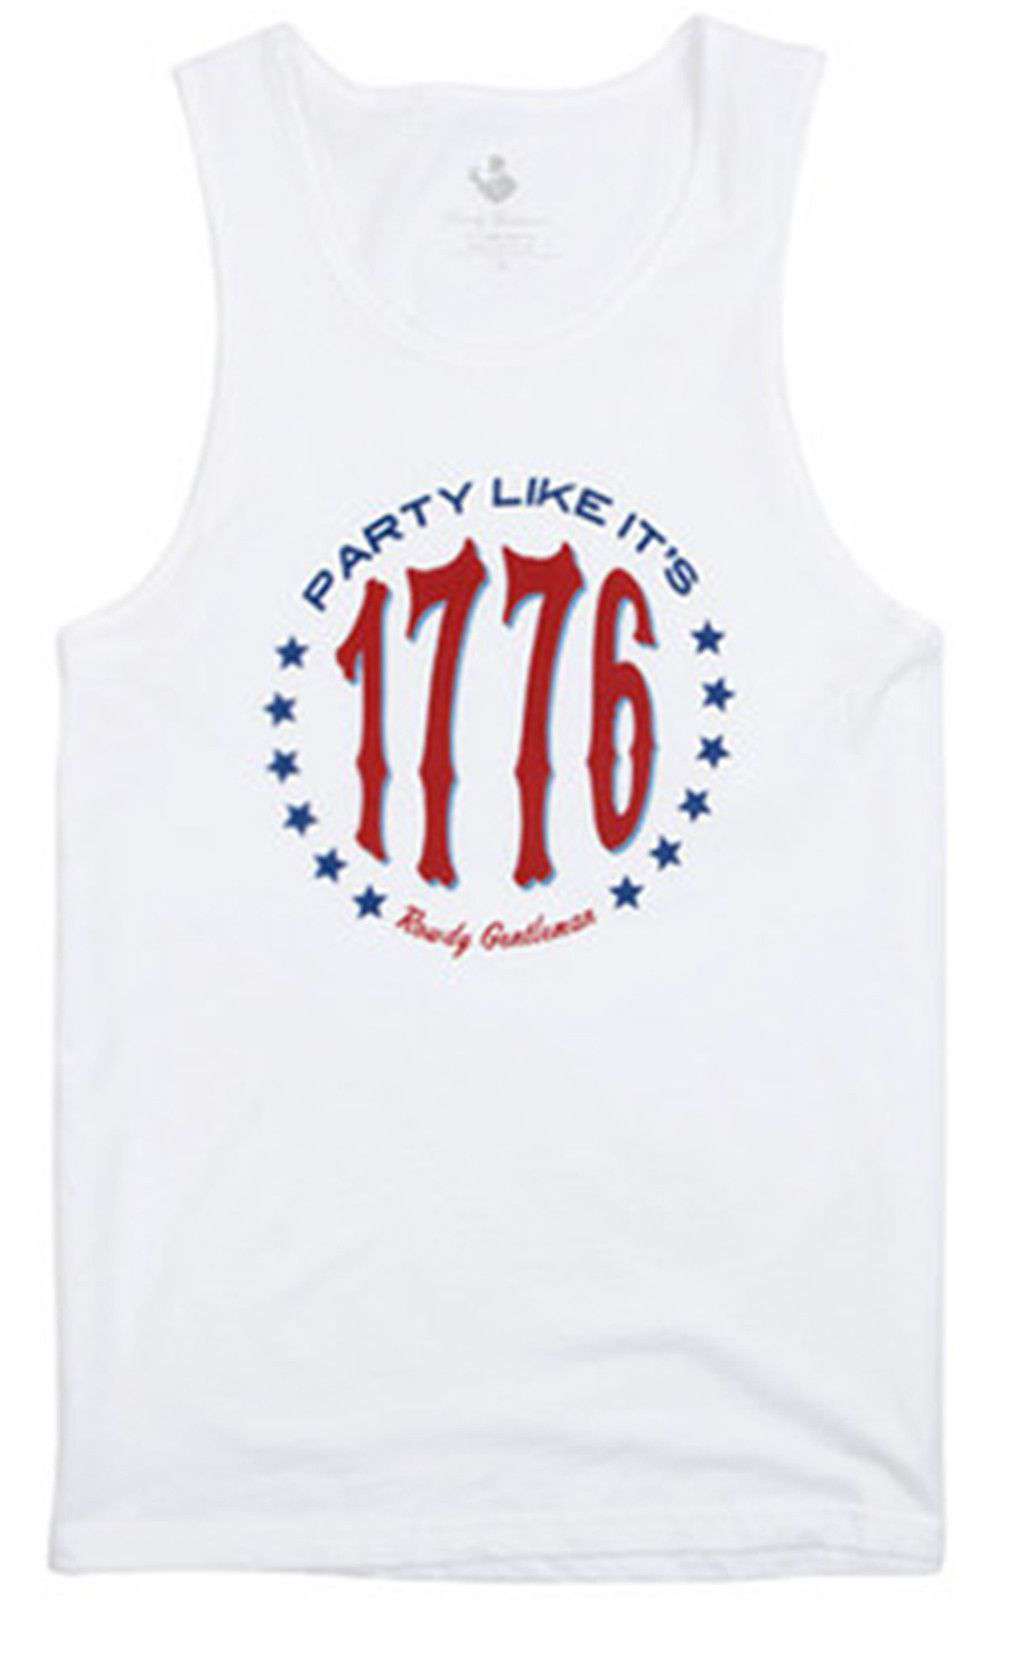 Party Like It's 1776 Tank Top in White by Rowdy Gentleman - Country Club Prep